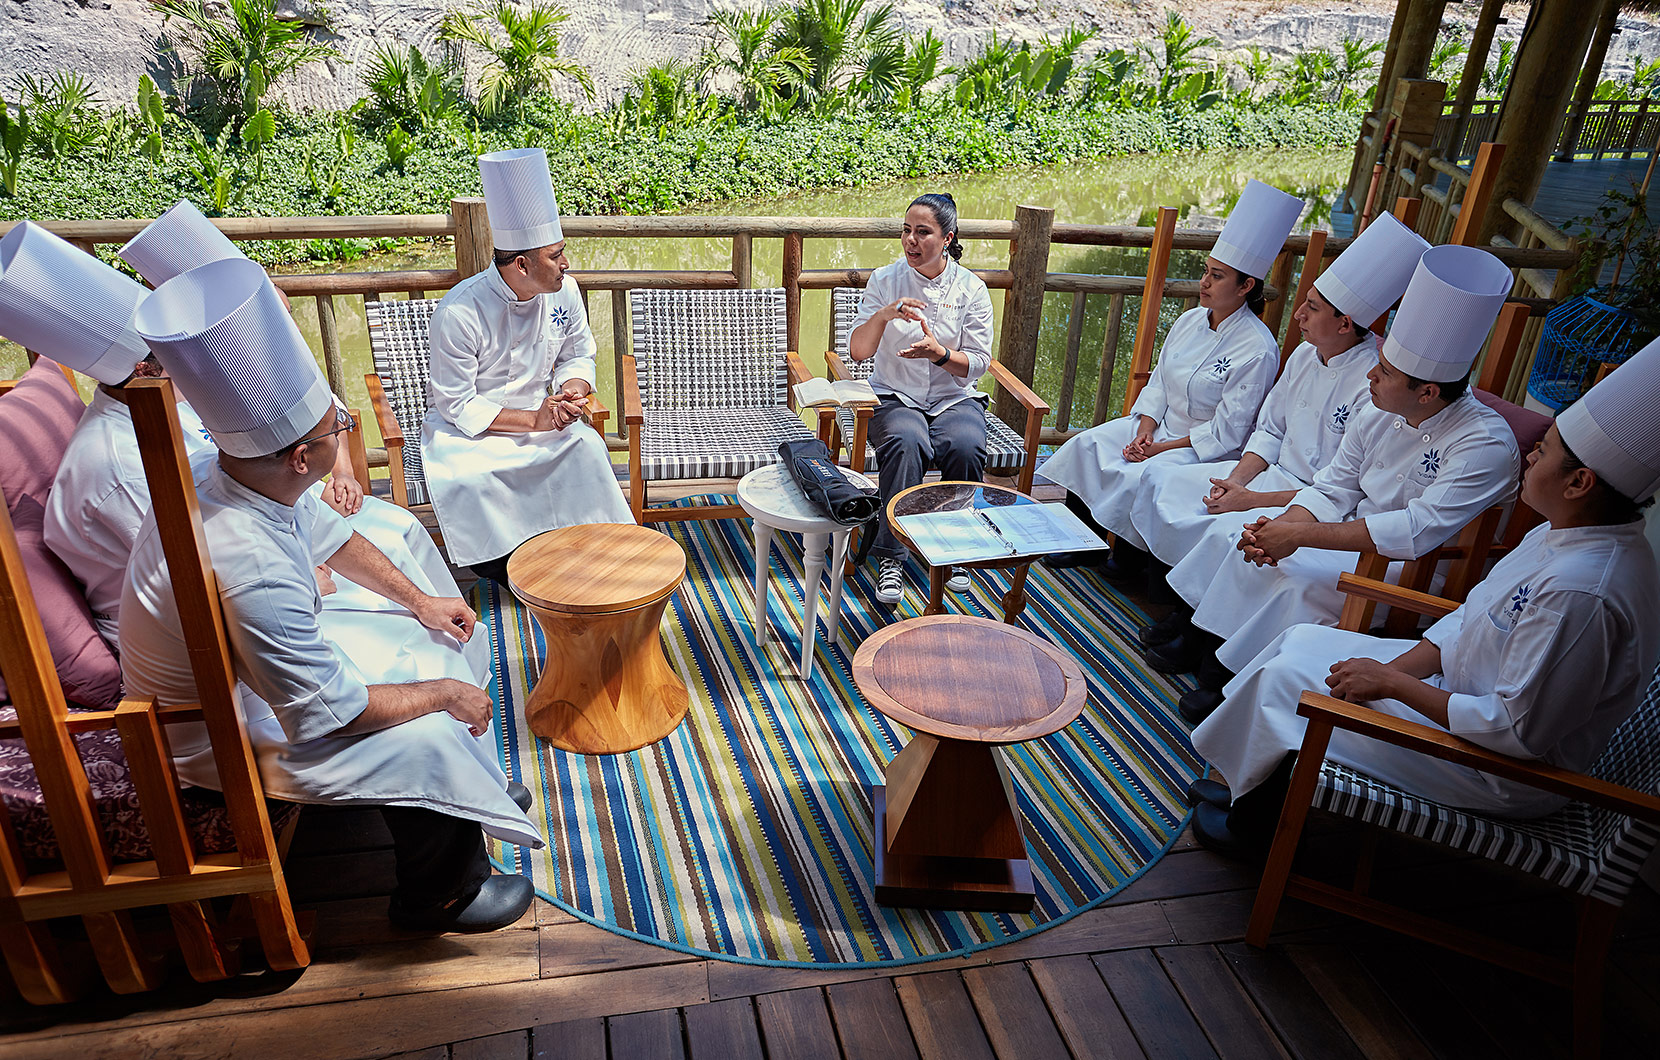 Chef Ixchel meets with Vidanta chefs to discuss her vision.